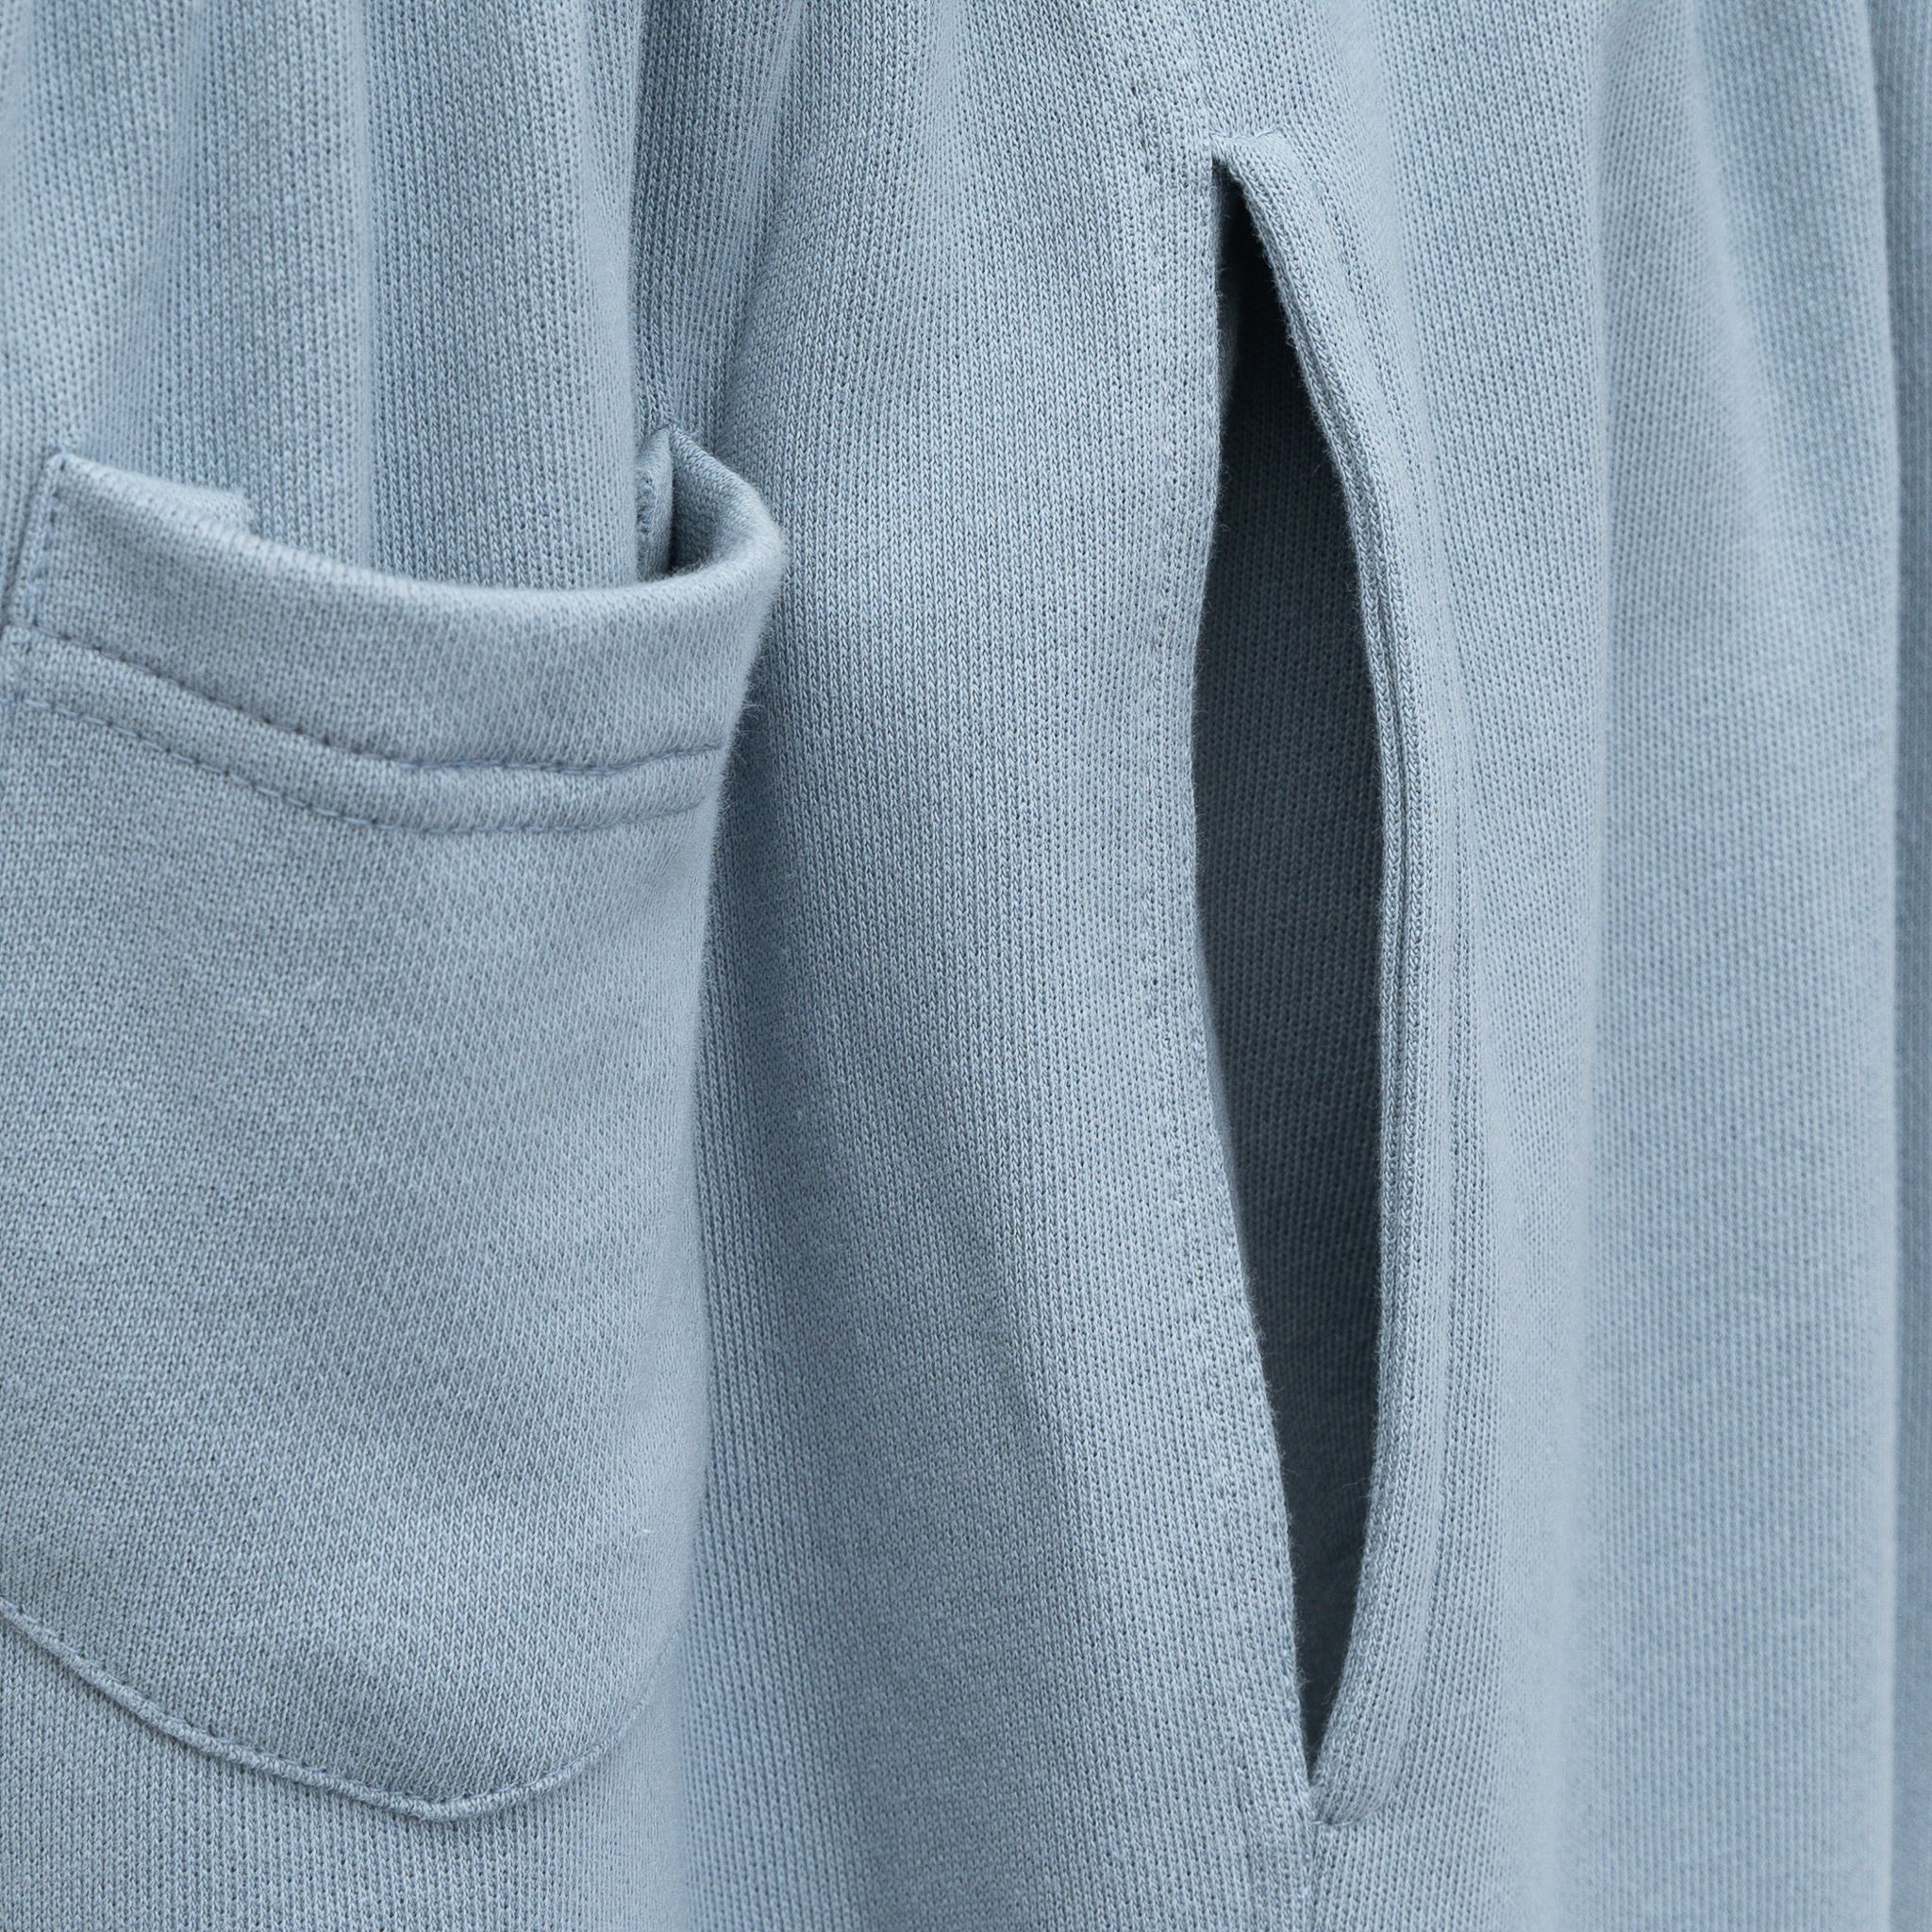 Sweat Pants The White Space | Dusty Blue